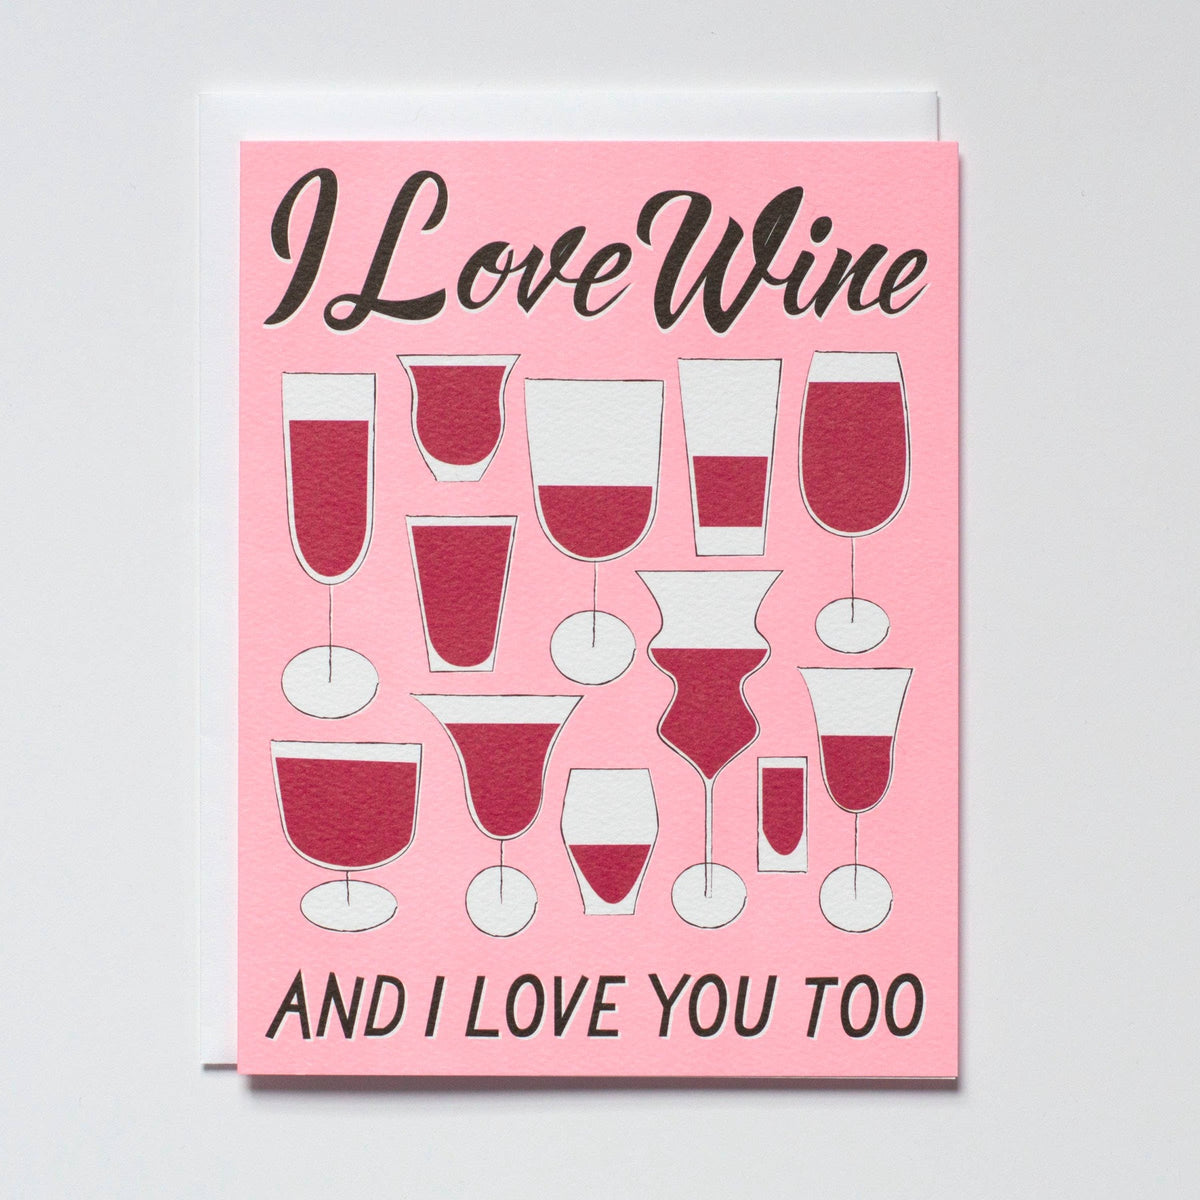 Banquet Workshop - I Love You and I Love Wine Too Note Card